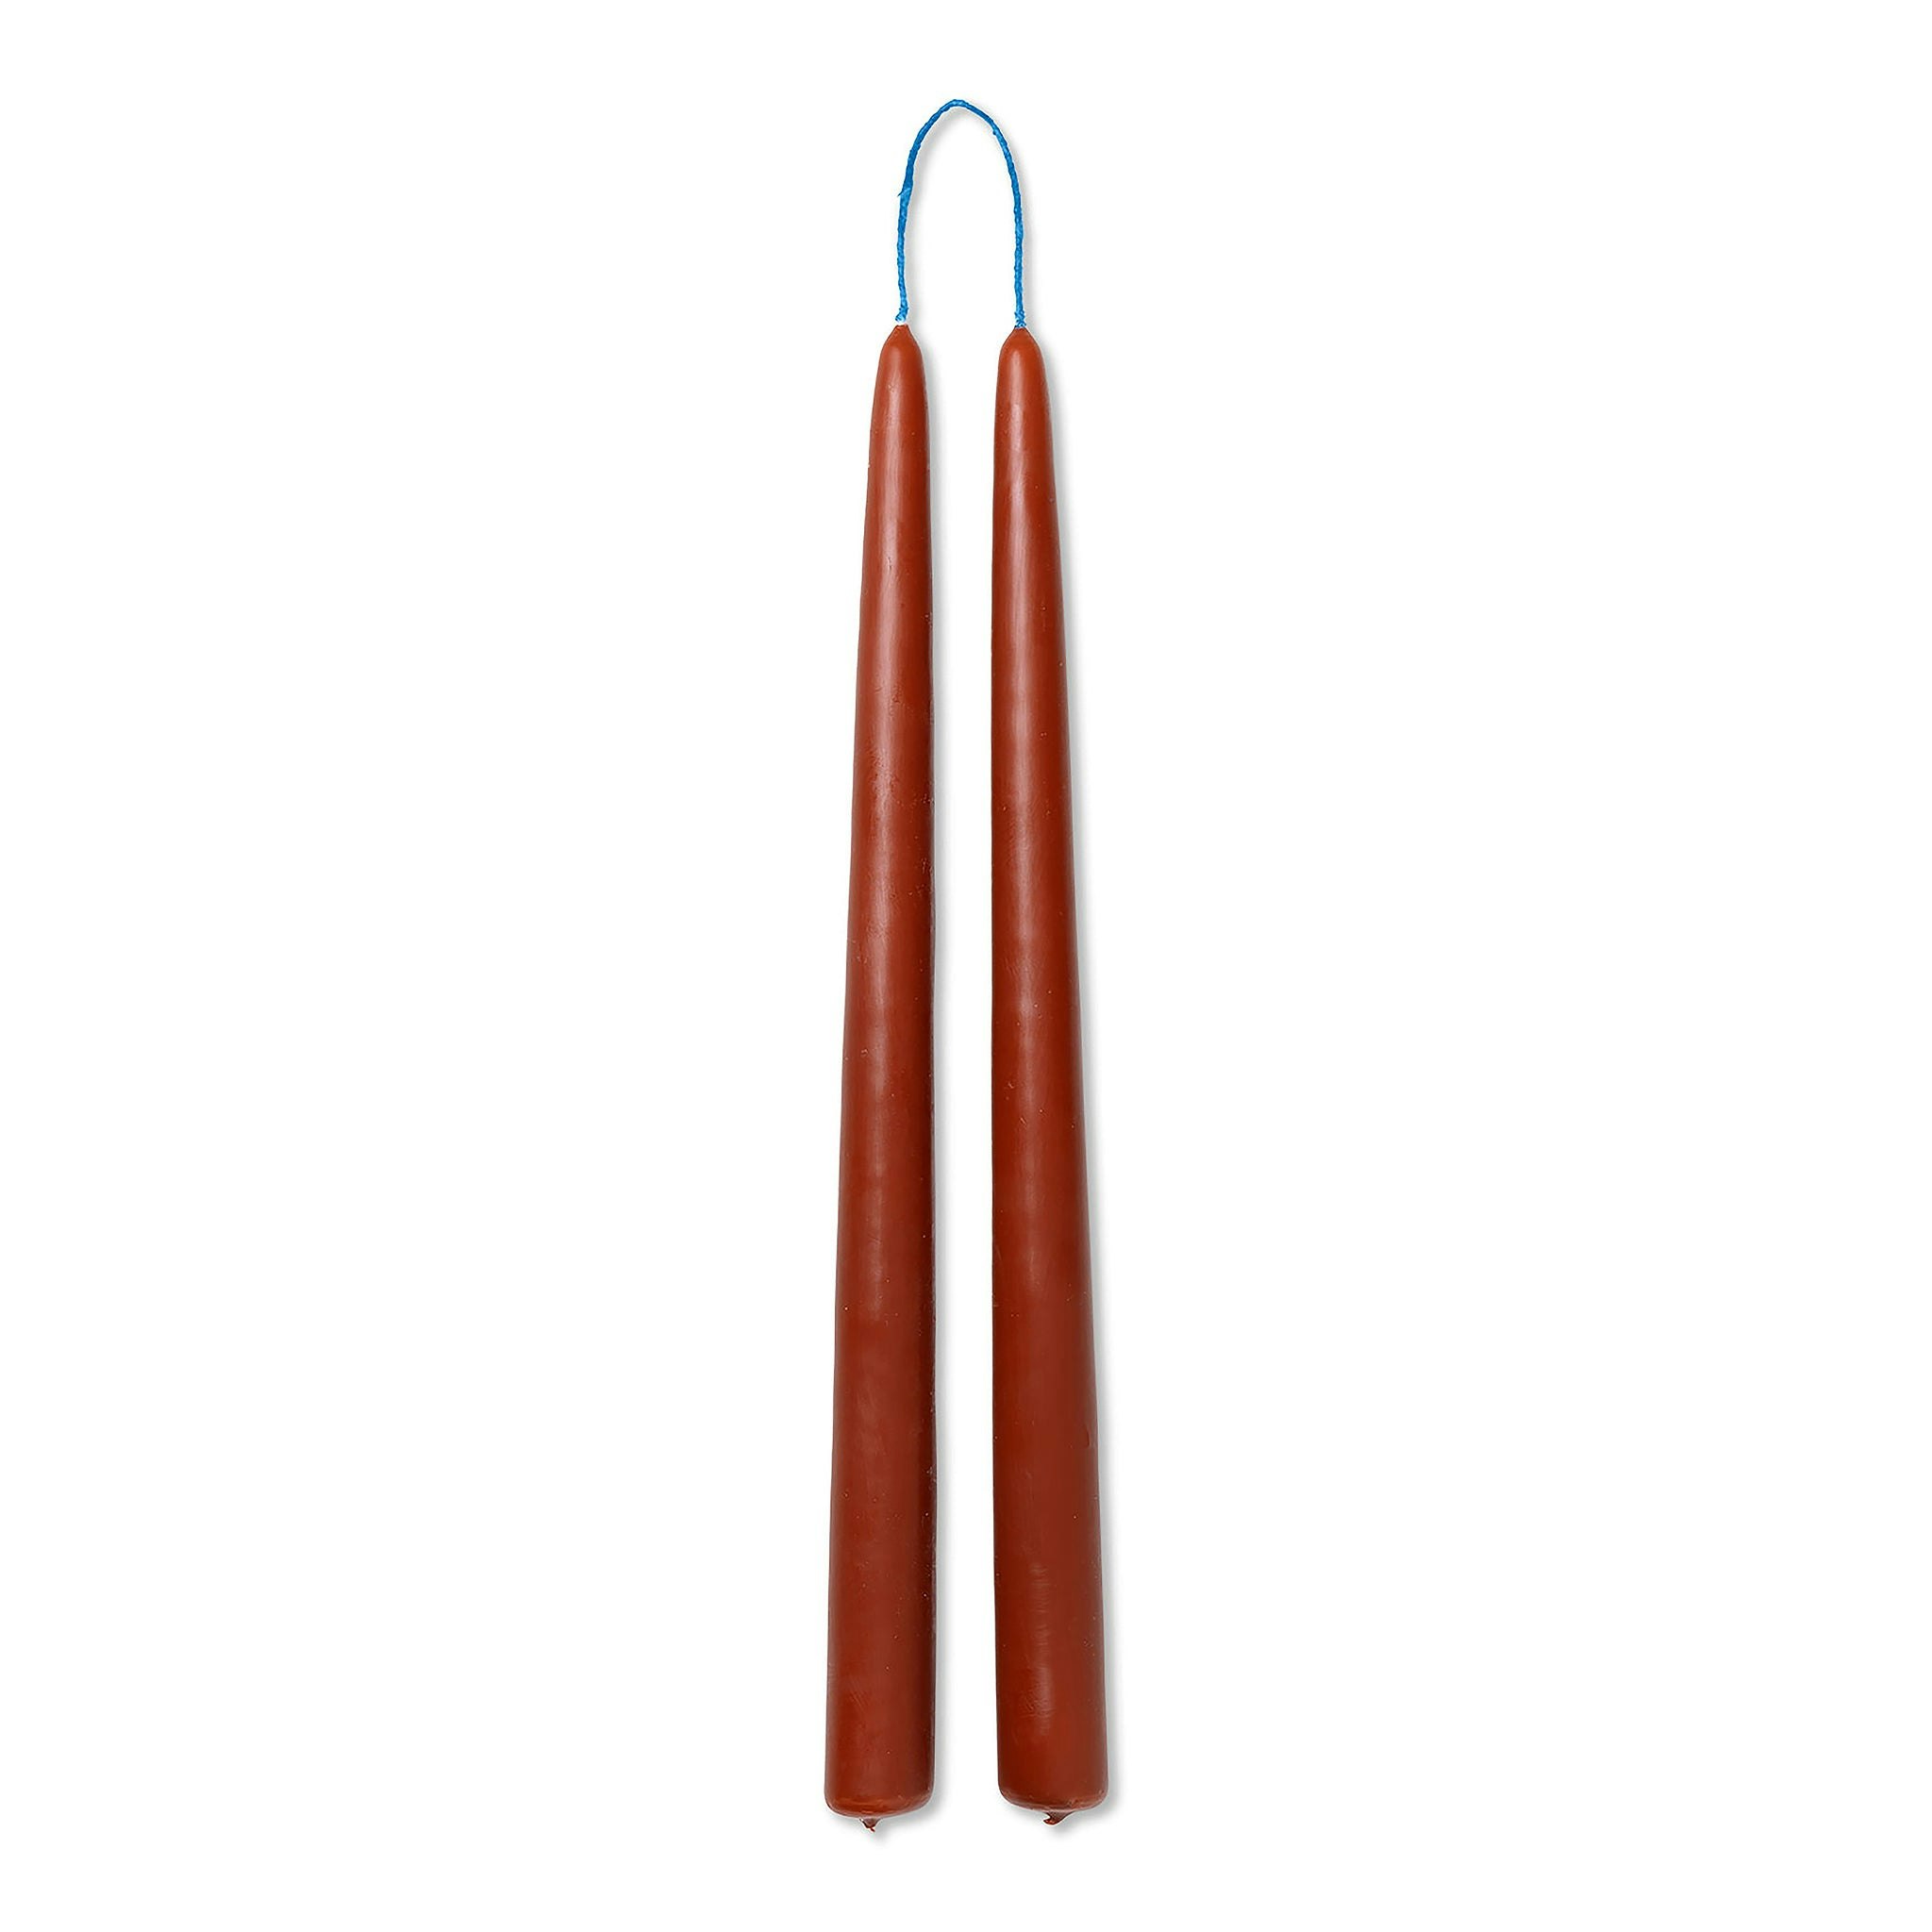 Dipped Candles - Set of 2 by Ferm Living